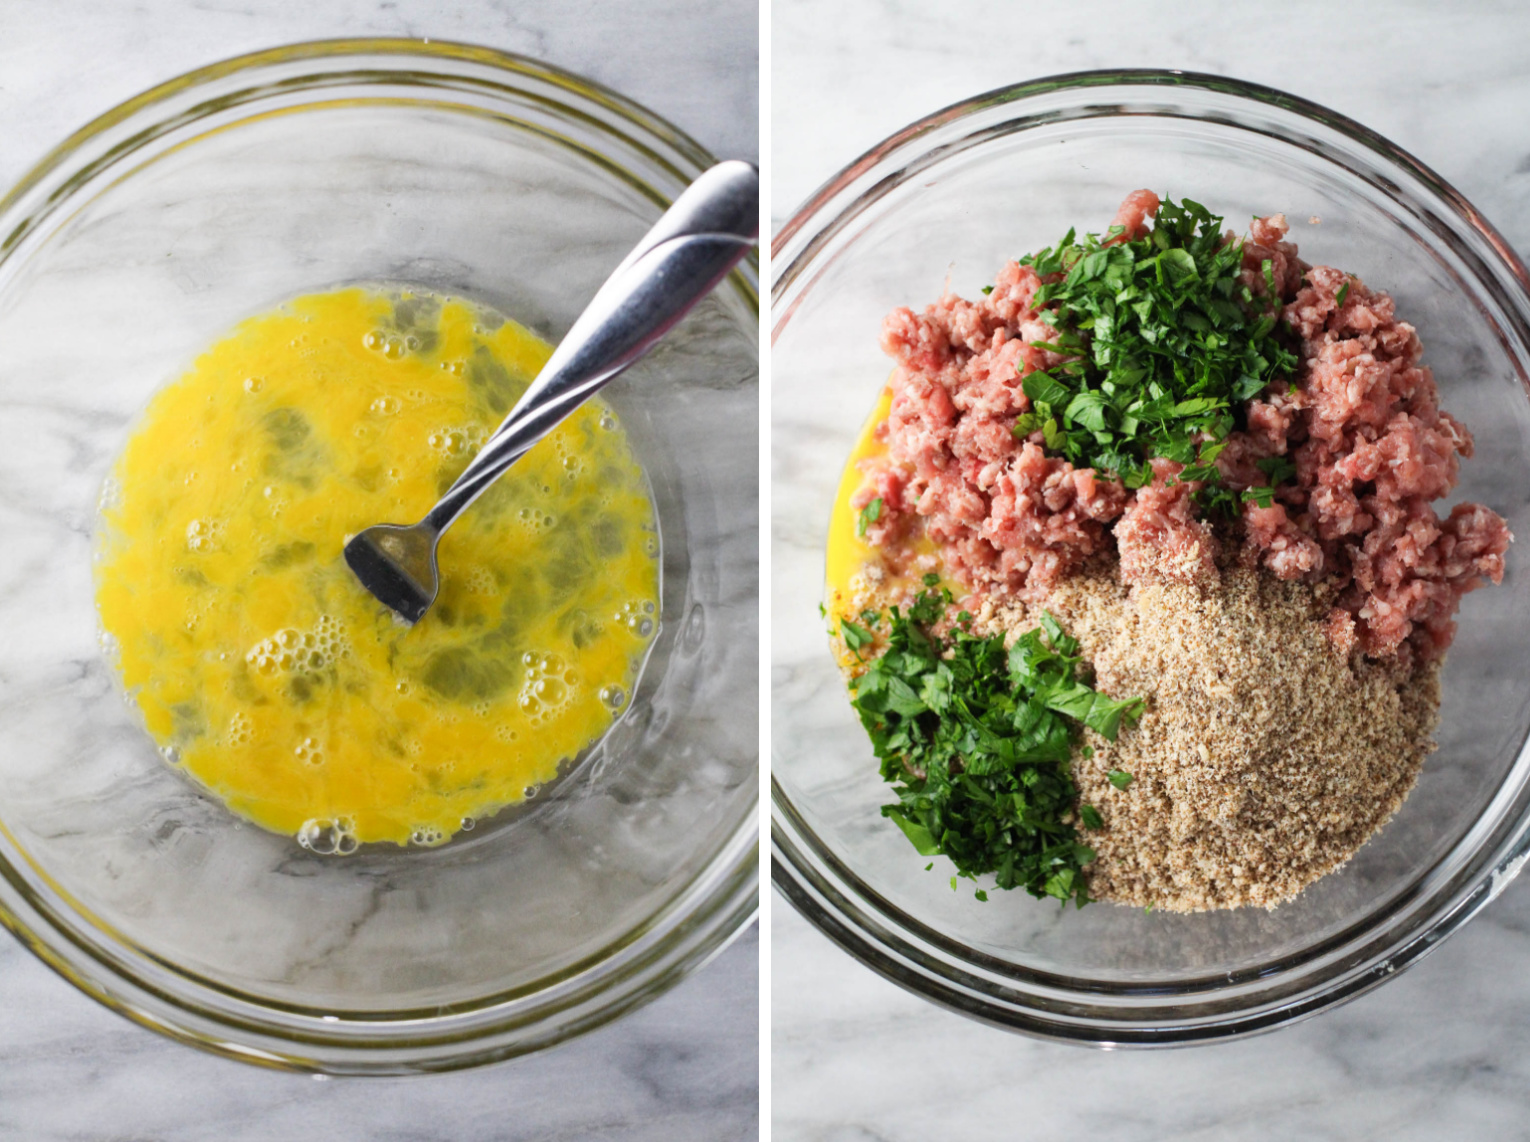 Two images side by side. The image on the left: beaten eggs in a glass bowl and a fork. The image on the right: almond mixture, ground meat, parsely, and eggs in a glass bowl.